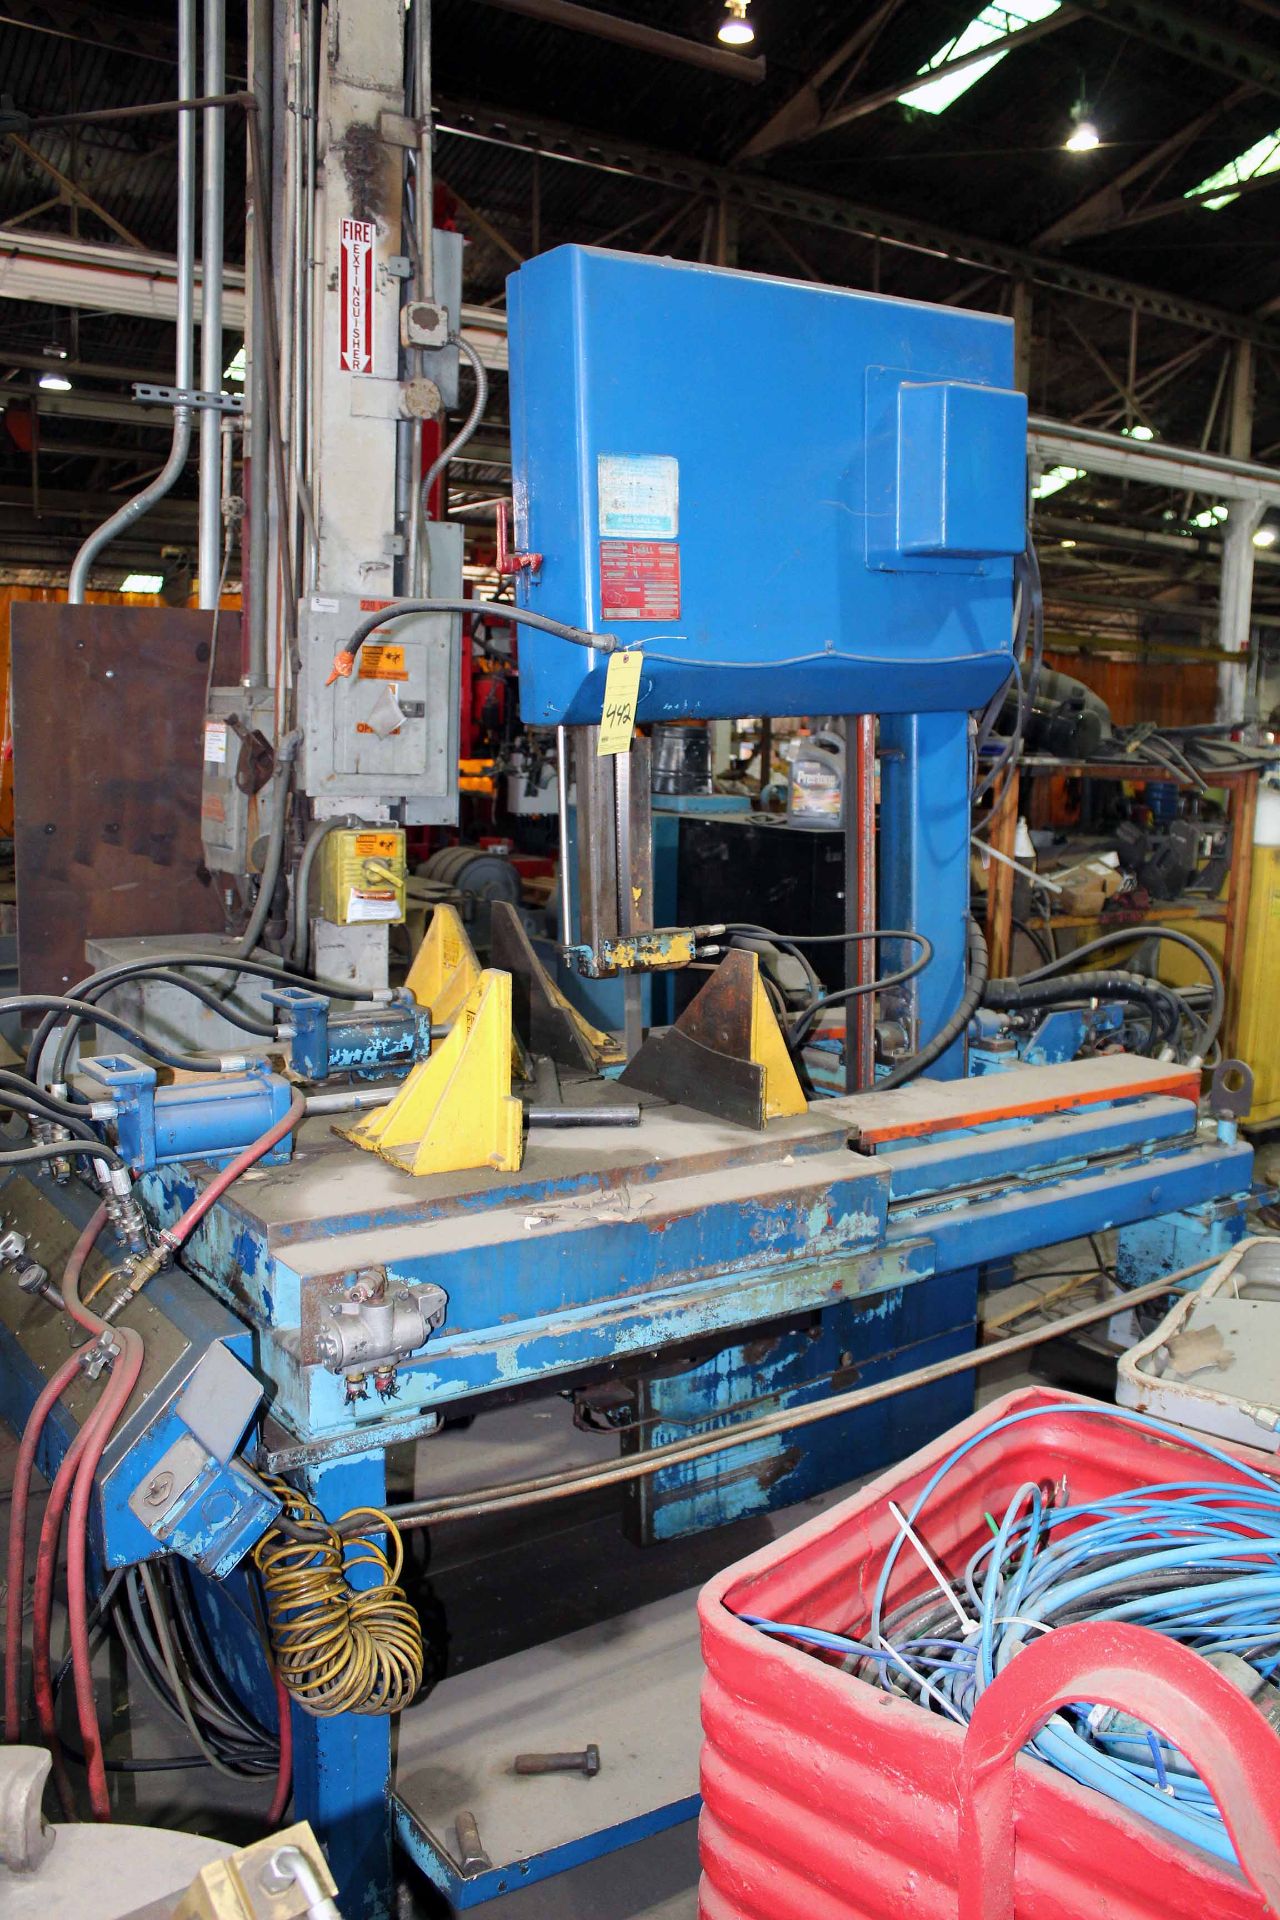 VERTICAL BANDSAW, DOALL MDL. TF-2021M, 480 v., 3 phase, 192" band length, hyd. clamping, hyd. pwr.